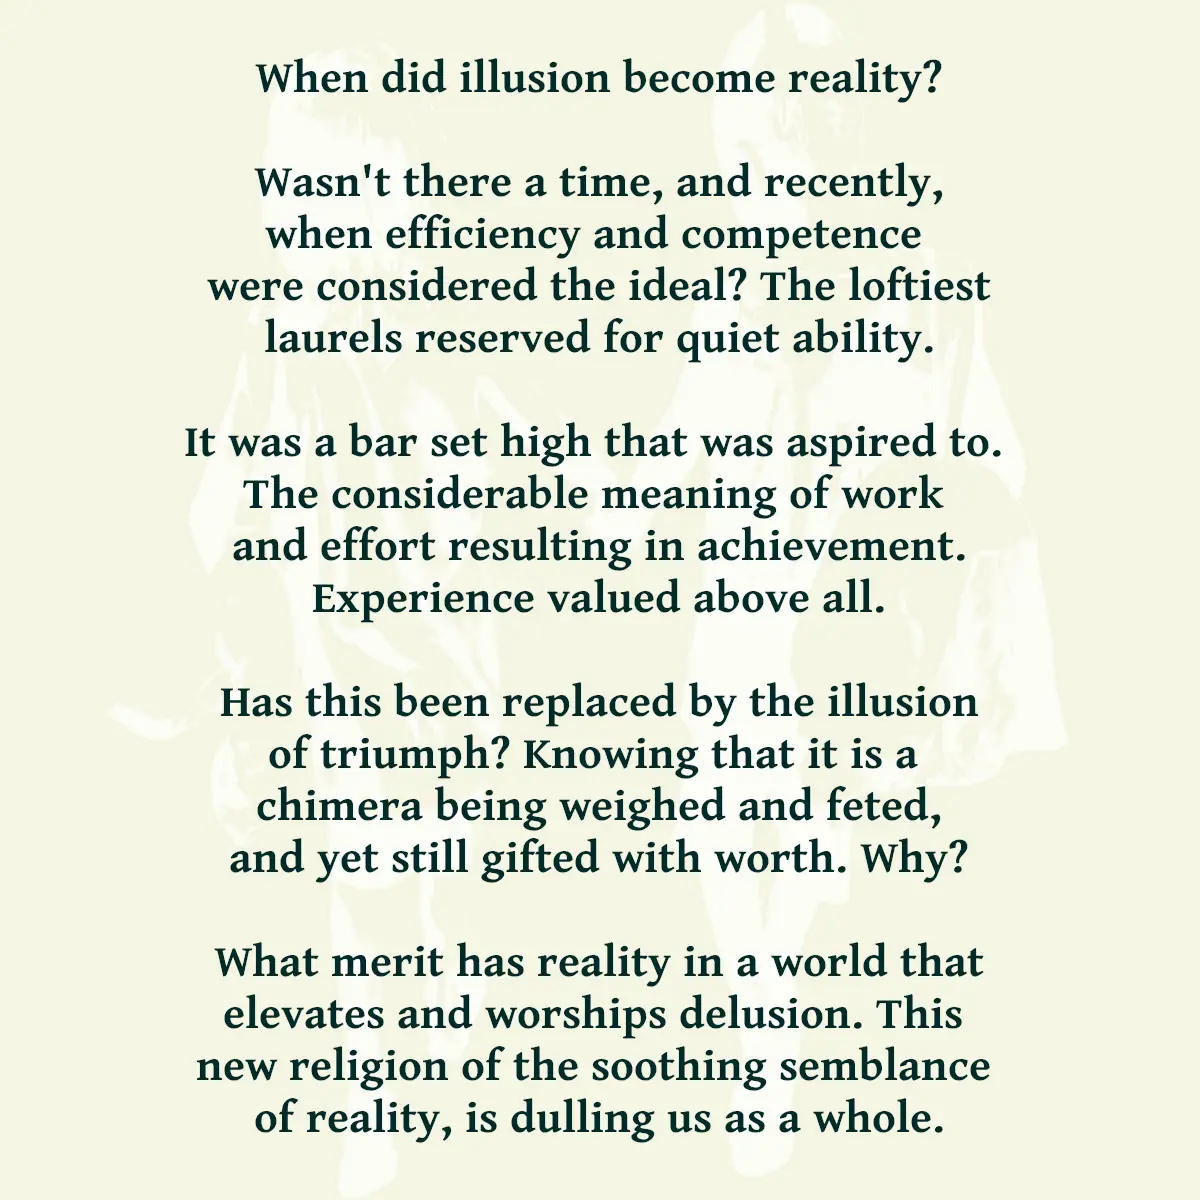 When did illusion become reality? Wasn't there a time, and recently, when efficiency and competence were considered the ideal? The loftiest laurels reserved for quiet ability. It was a bar set high that was aspired to. The considerable meaning of work and effort resulting in achievement. Experience valued above all. Has this been replaced by the illusion of triumph? Knowing that it is a chimera being weighed and feted, and yet still gifted with worth. Why? What merit has reality in a world that elevates and worships delusion. This new religion of the soothing semblance of reality, is dulling us as a whole.